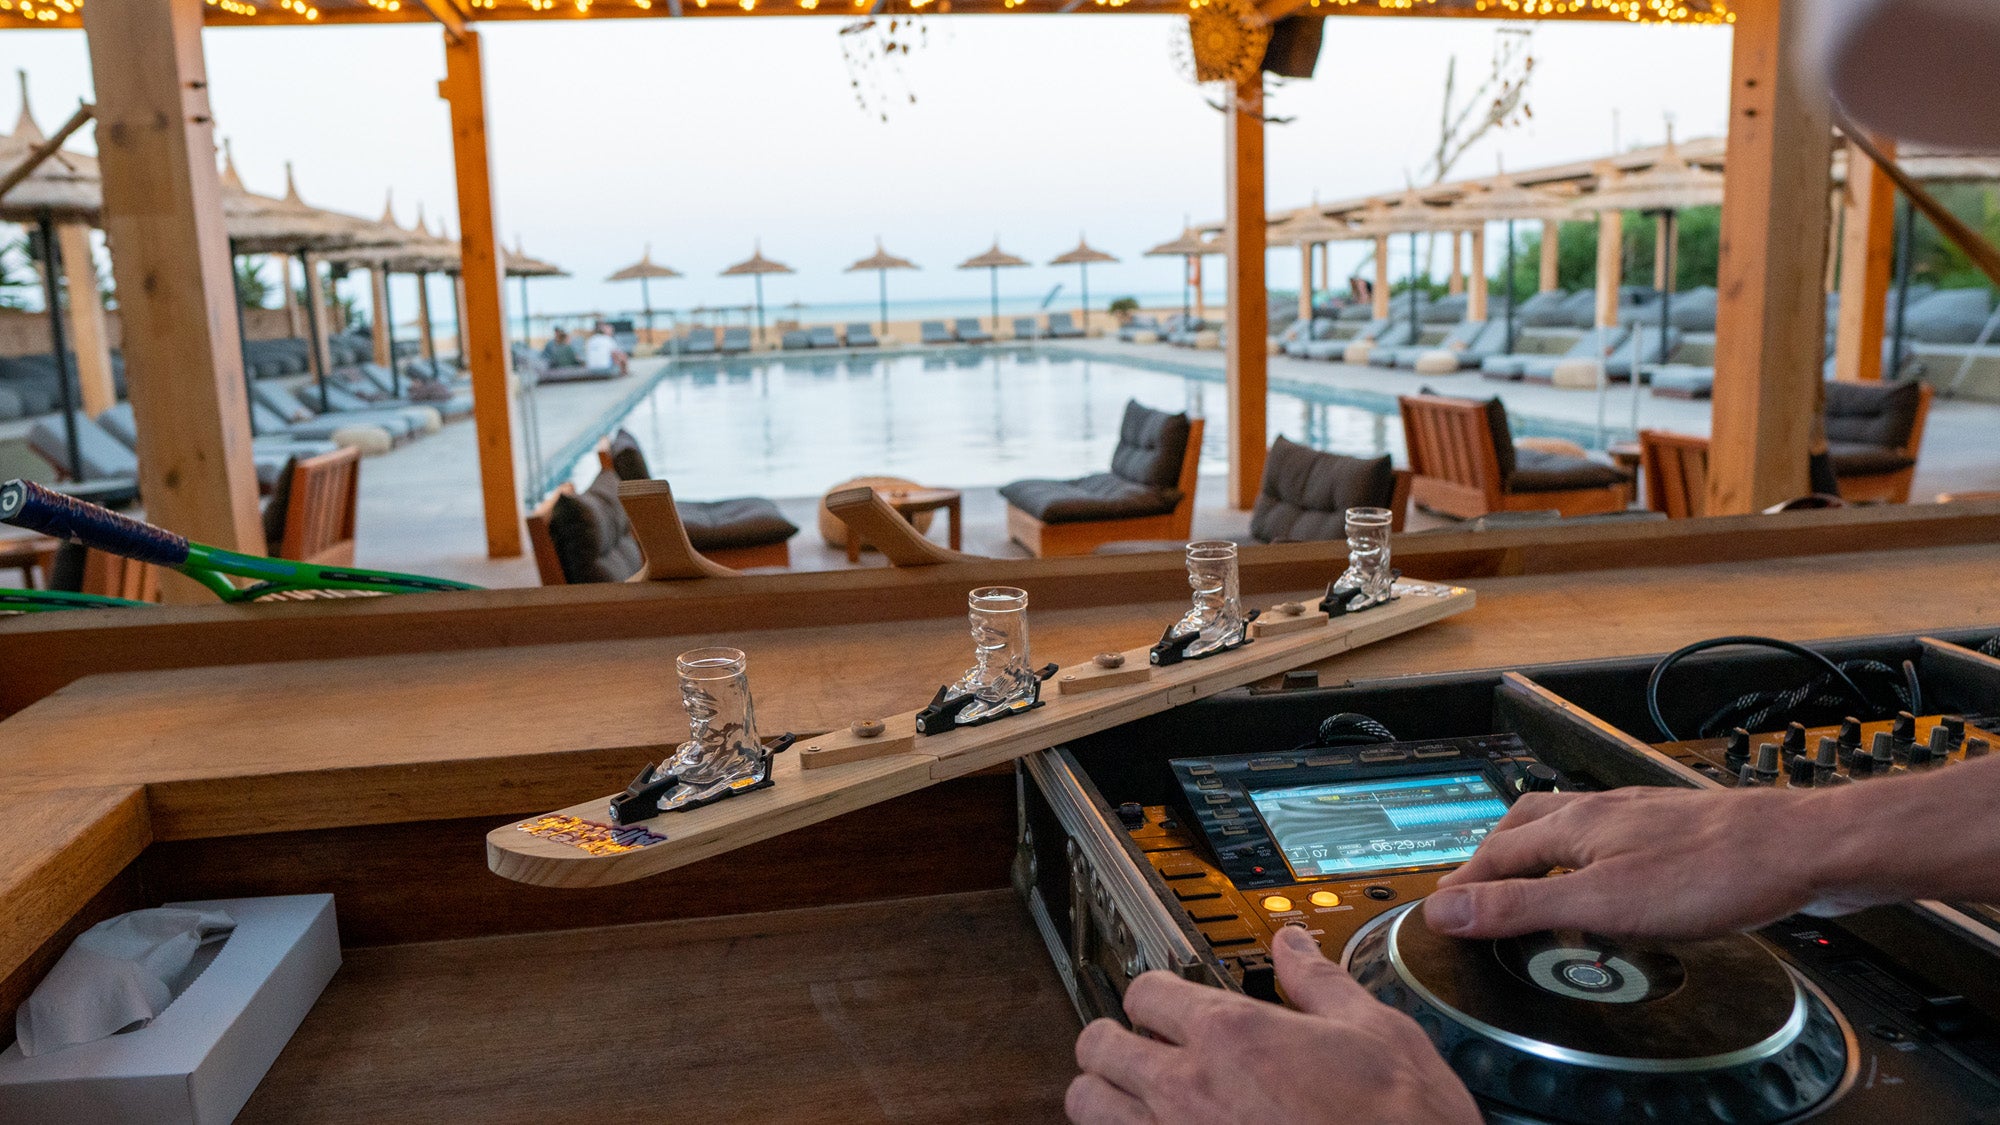 Photo of Apres Allstar SwigSki3000 a modular wooden ski that comes in 4 parts and clicks together to make a single shot ski. Image is of the ShotSki3000 in a DJ booth in front of a swimming pool.